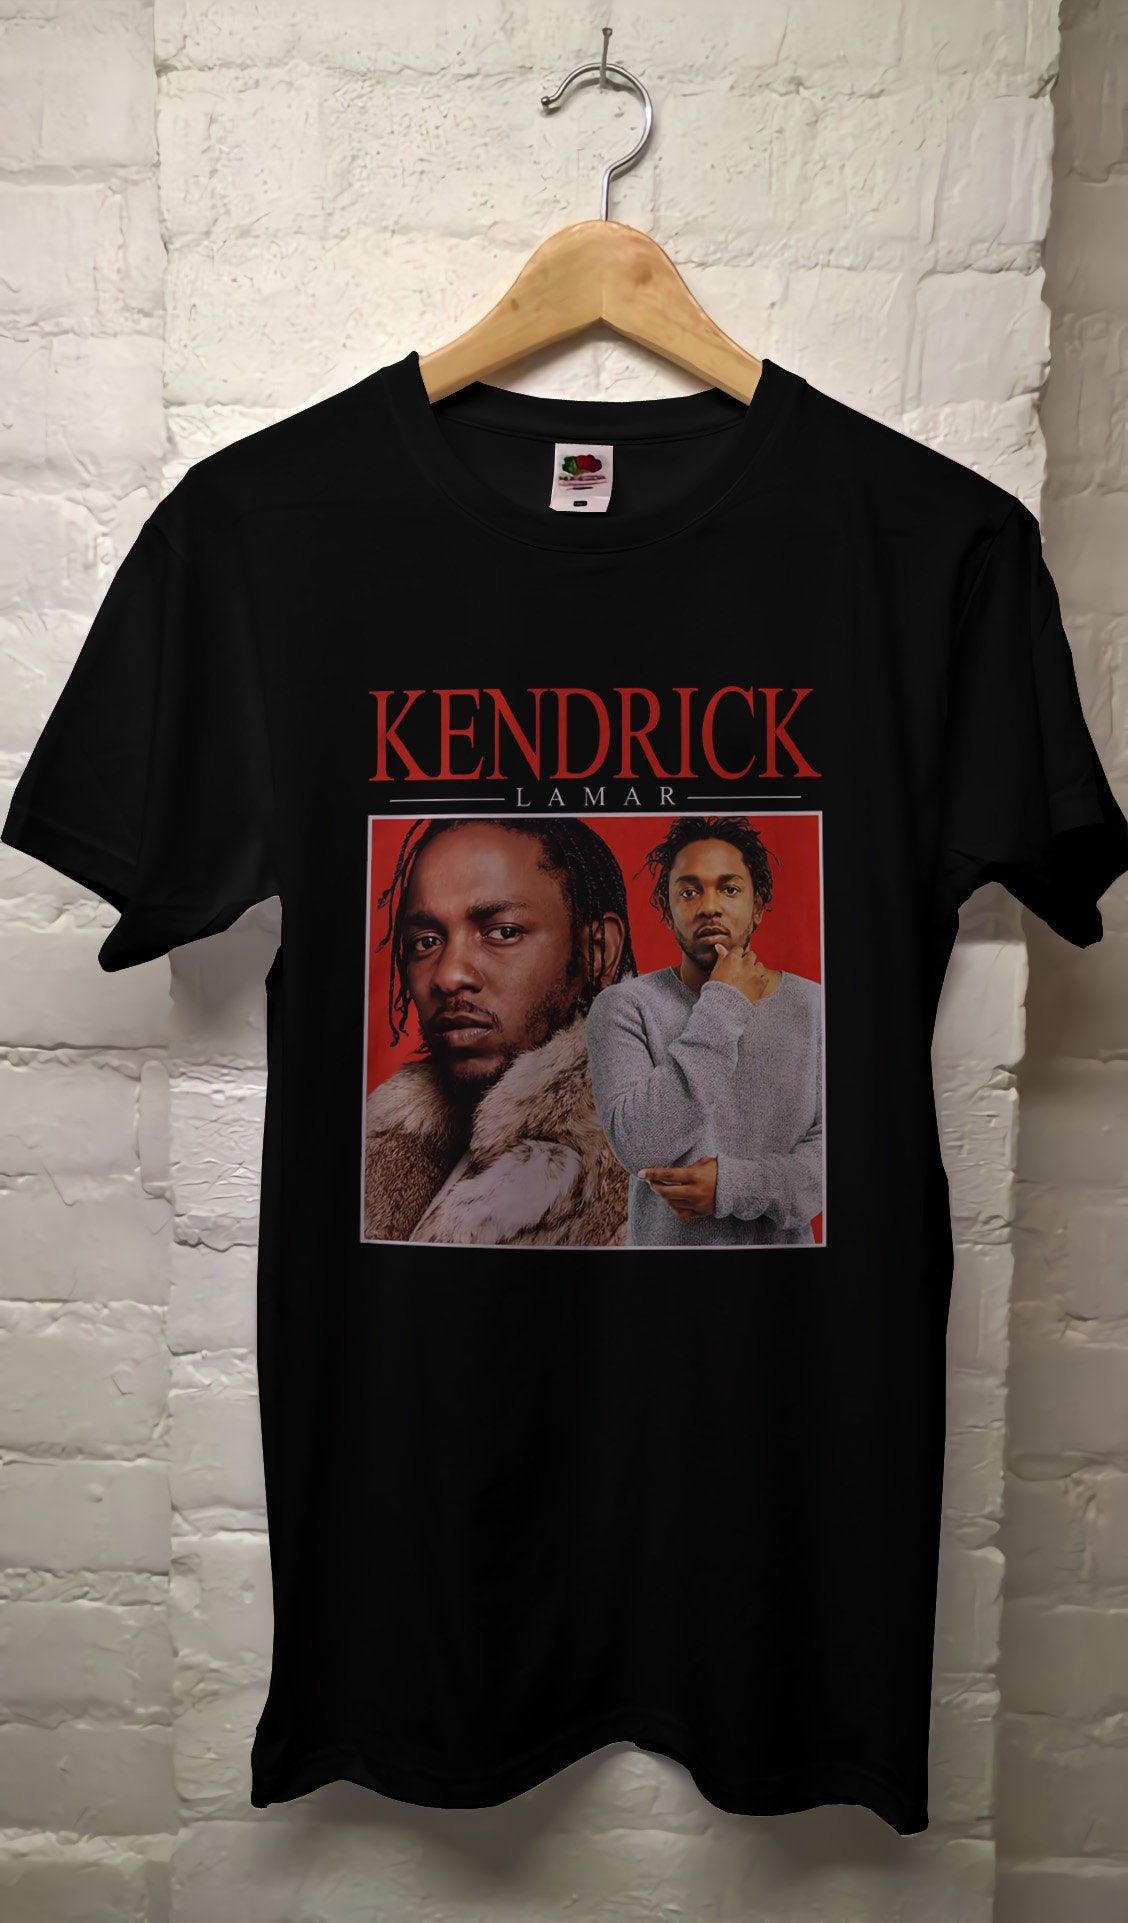 Kendrick Lamar Shop: Your Destination for Music-inspired Goodies